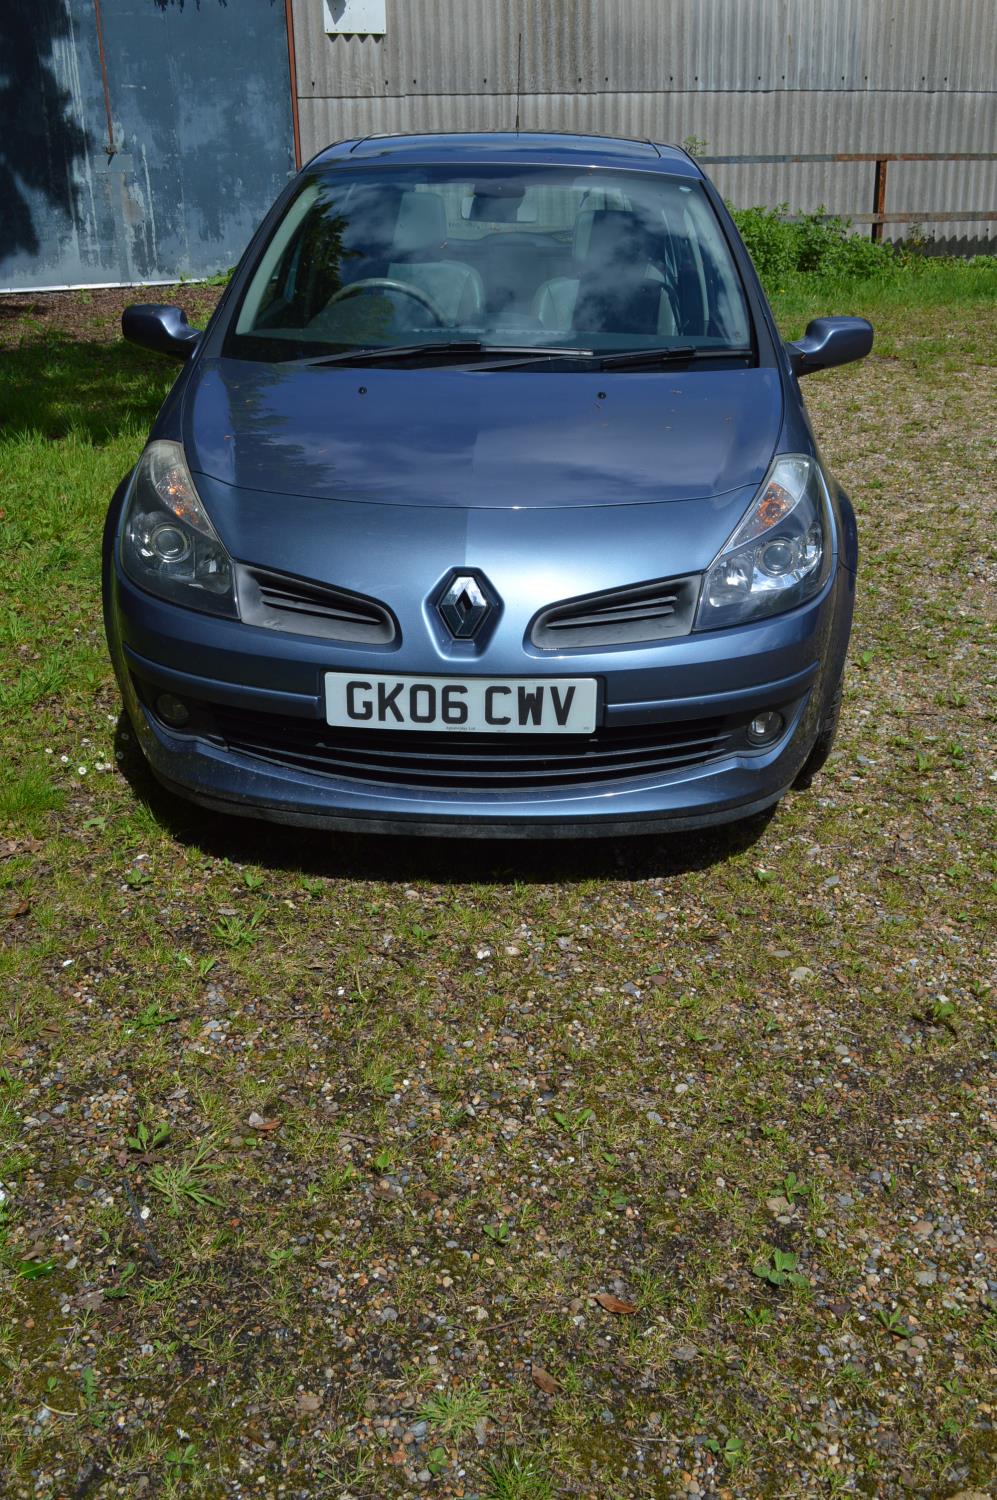 2006 Renault Clio Initiale A, 1.6 automatic, petrol, MoT March 2025, approx 80,000 miles, Reg GK06 - Image 2 of 9